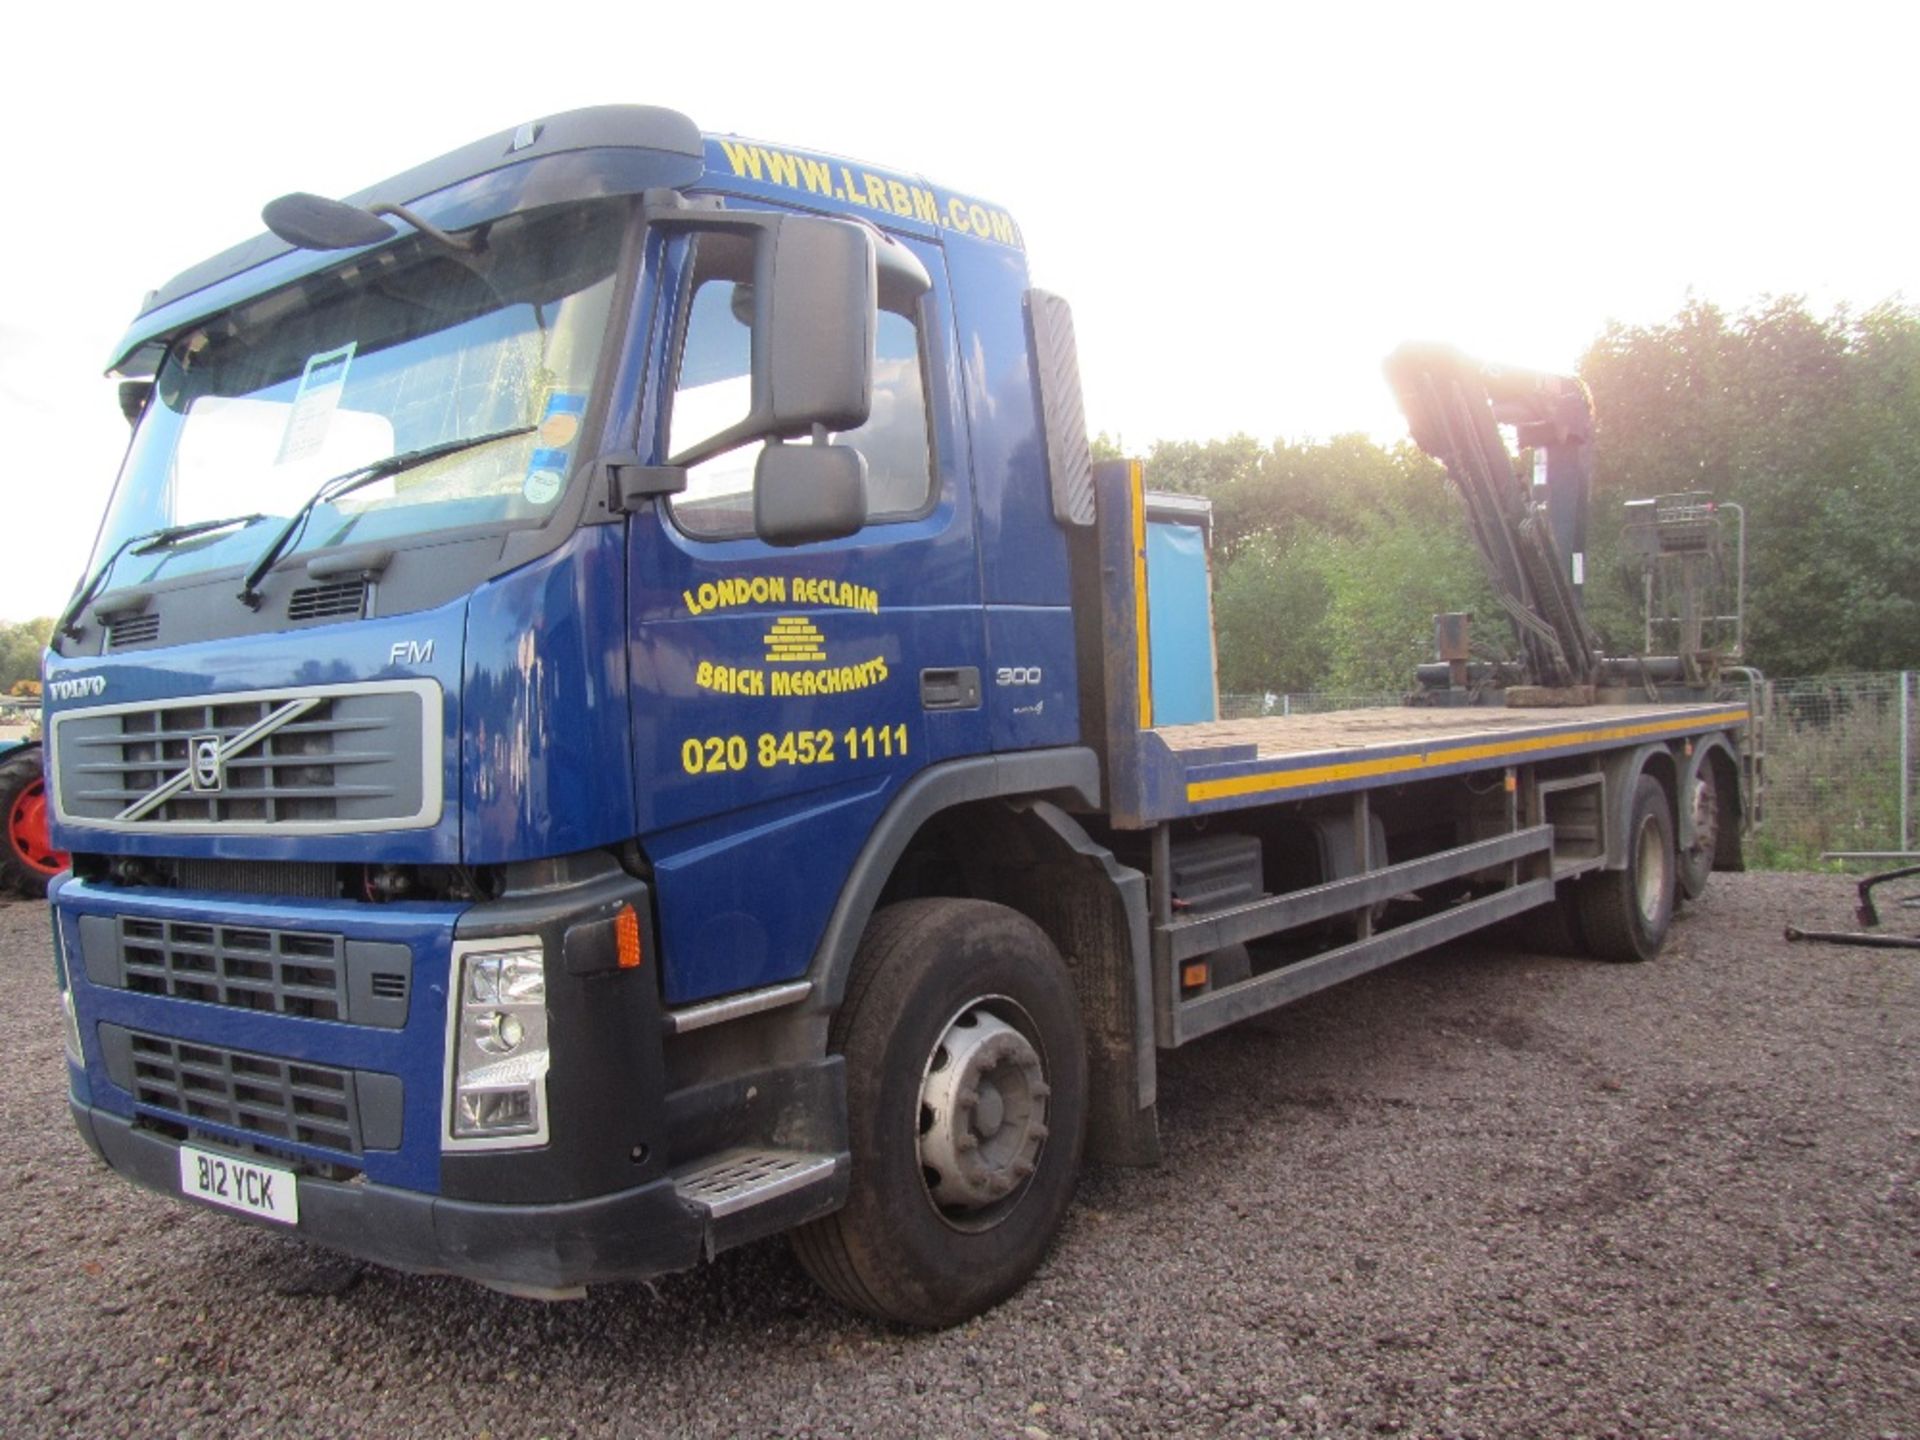 2008 Volvo FM9 6x2 Crane Lorry with Hiab Double Extension Crane, Rear Lift Axle. NUMBER PLATE NOT